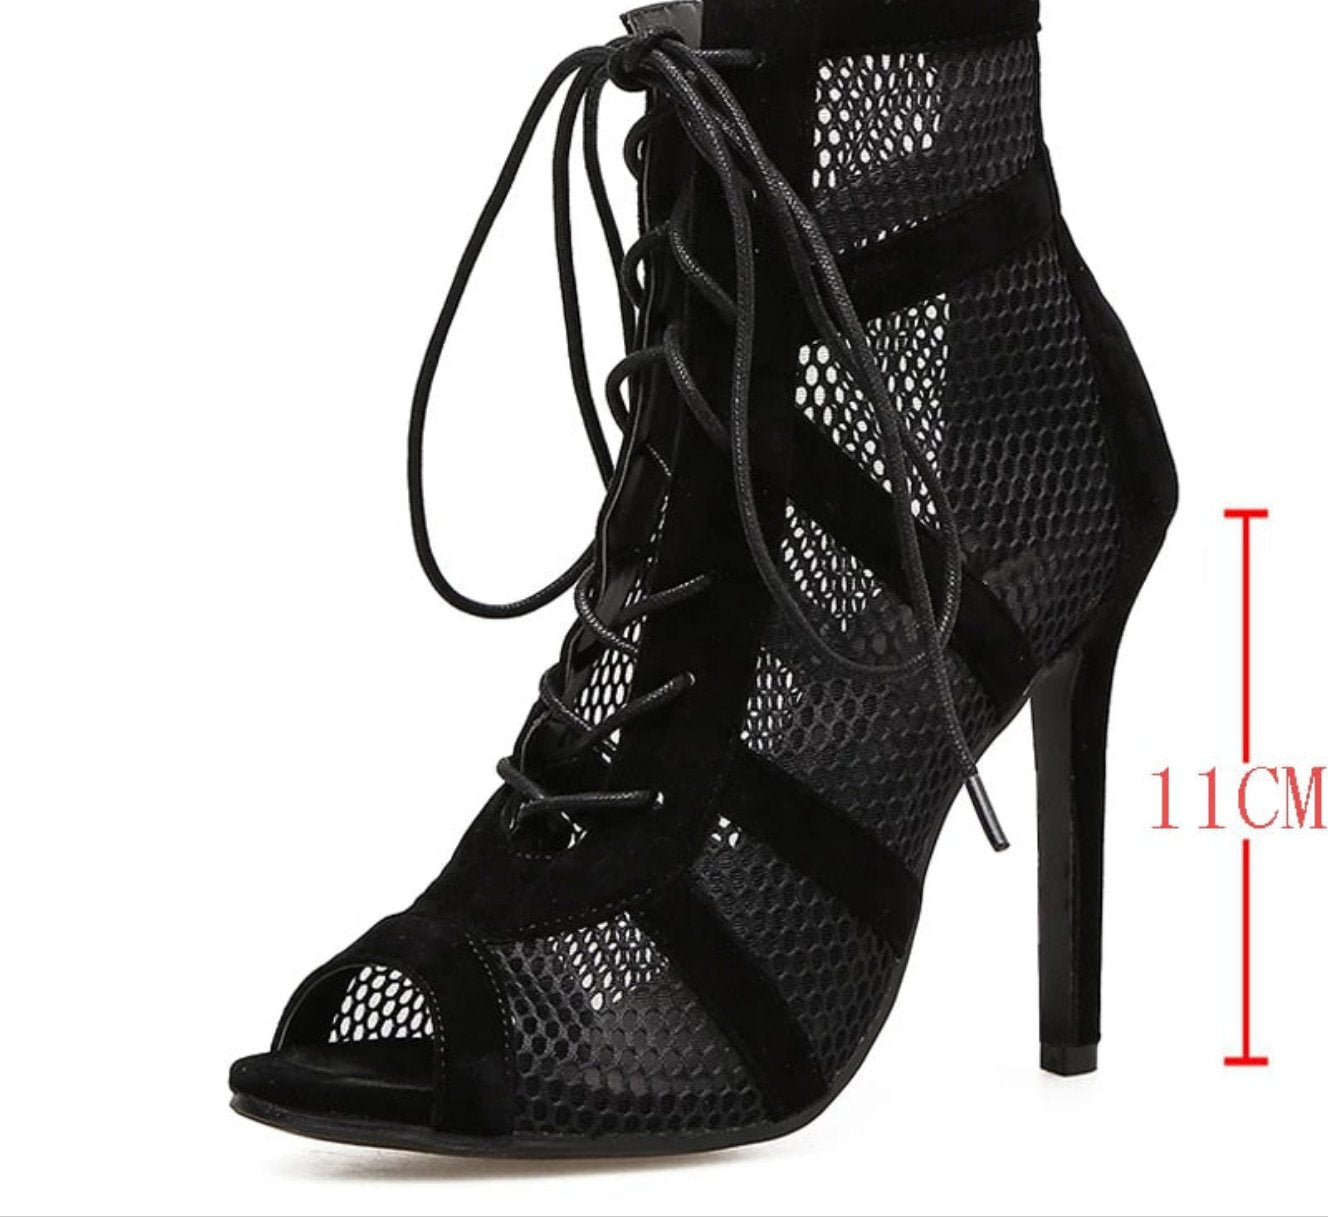 2023 Fashion Basic Sandals Boots Women High Heels Pumps Sexy Hollow Out Mesh Lace-Up Cross-tied Boots Party Shoes 35-42